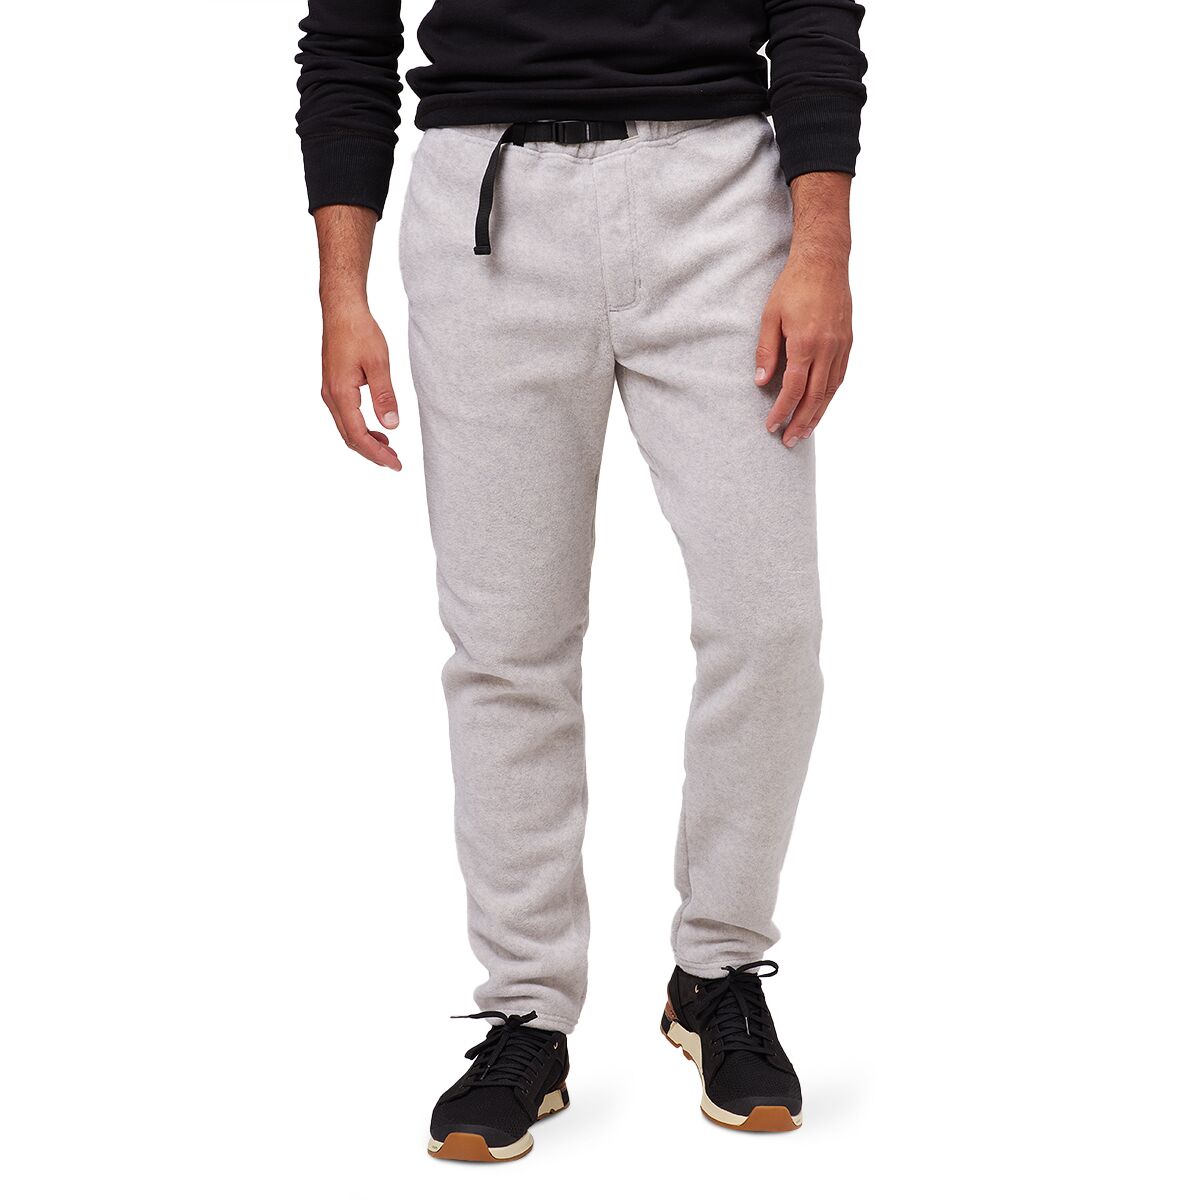 Patagonia M's Synchilla Snap-T Pant - Black w/ Forge Grey - Large